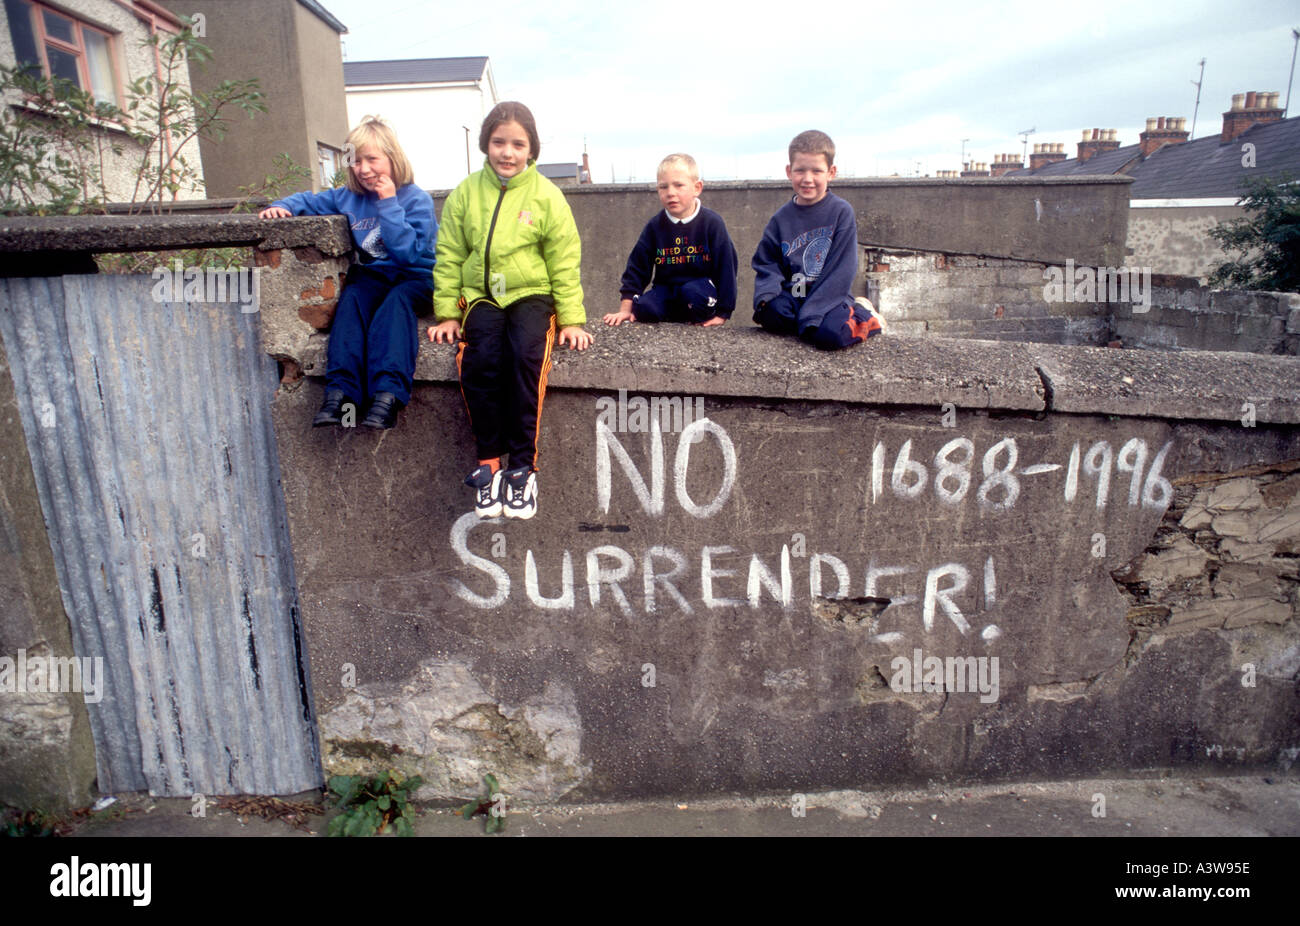 Darry Ulster Northern Ireland site of the Troubles Kids with names of British POW s and their feelings Stock Photo